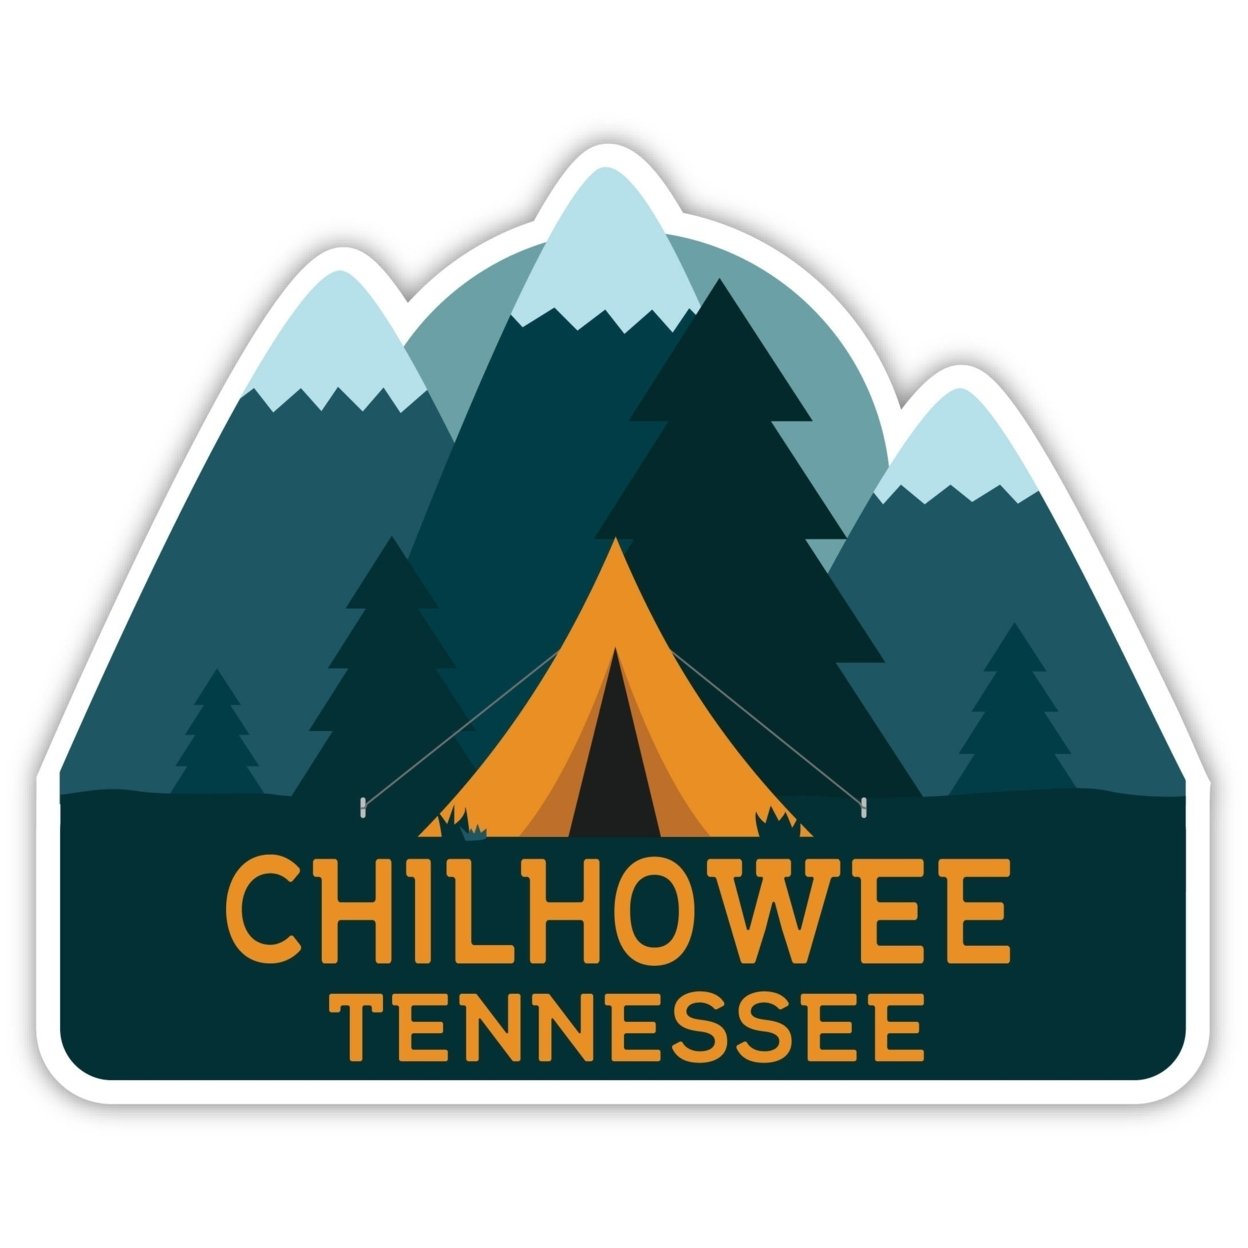 Chilhowee Tennessee Souvenir Decorative Stickers (Choose Theme And Size) - Single Unit, 10-Inch, Camp Life